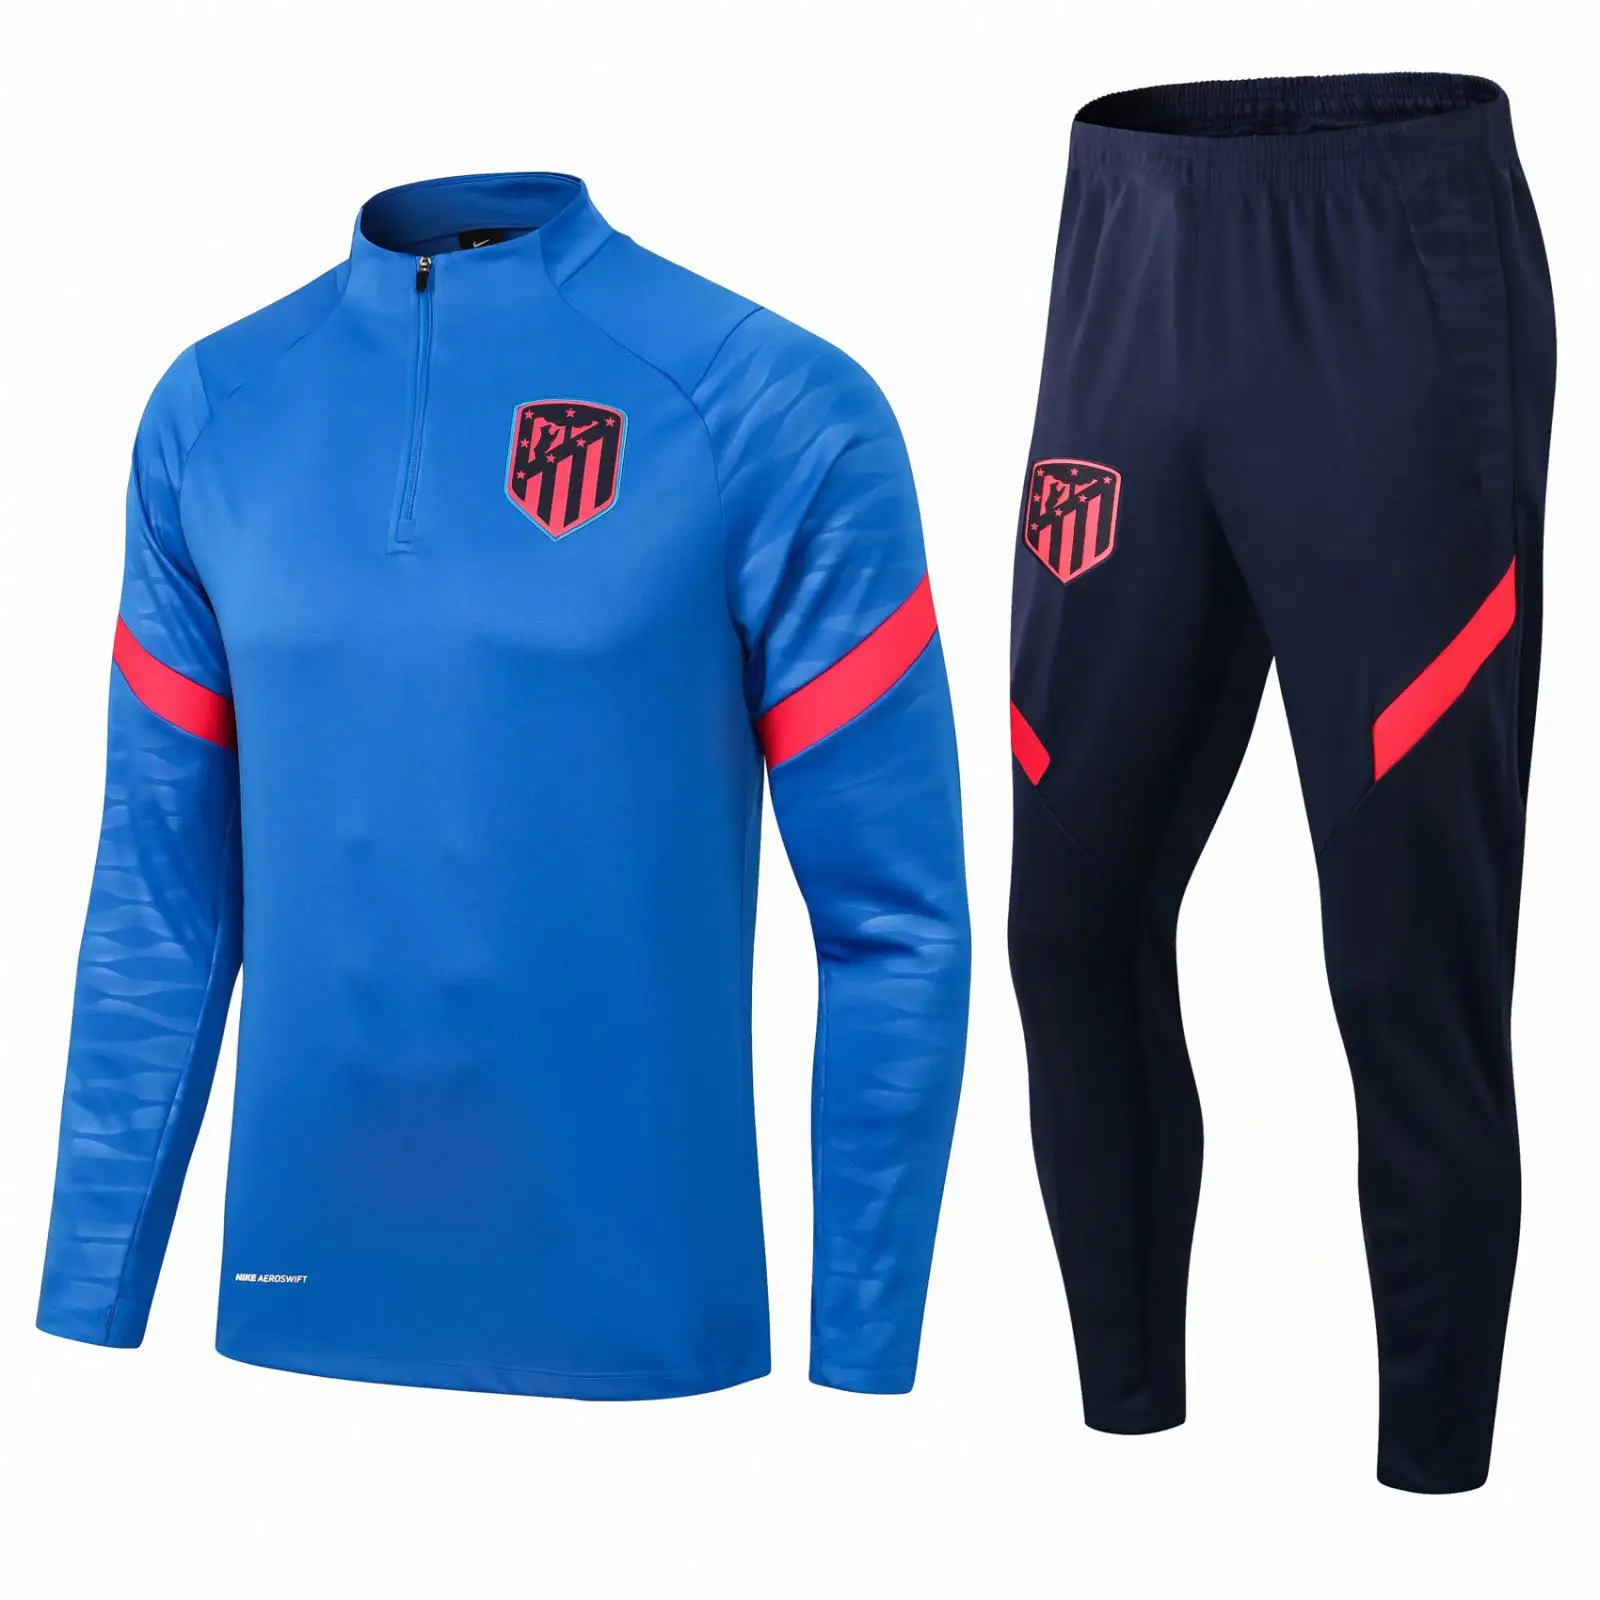 

New Paris Liver pool Football Jersey Long Sleeve Suit Sweater Training Jersey Game Jersey, As the picture shows